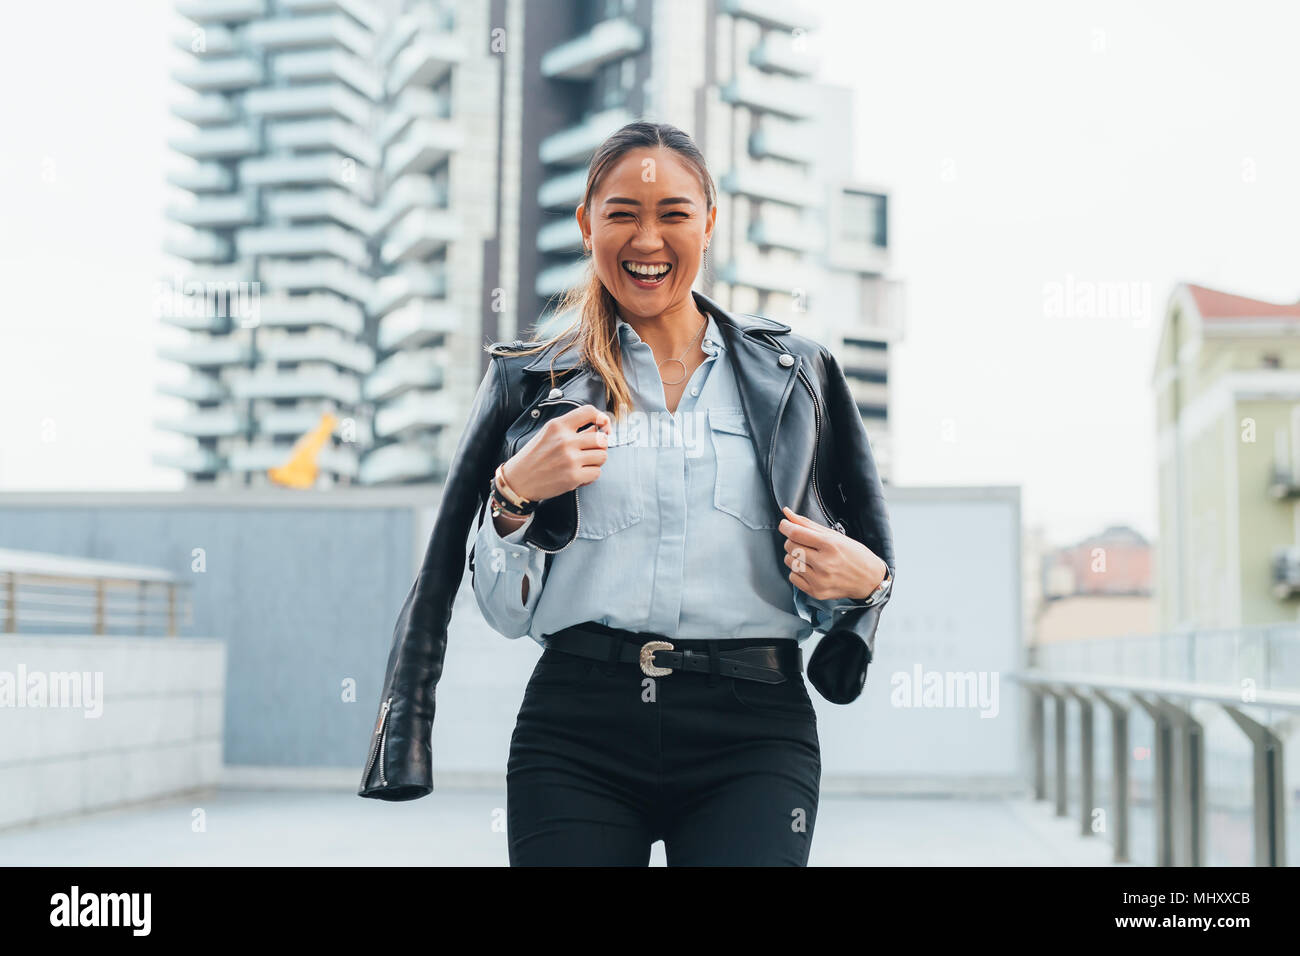 Portrait of businesswoman outdoors, wearing leather jacket around shoulders, laughing Stock Photo